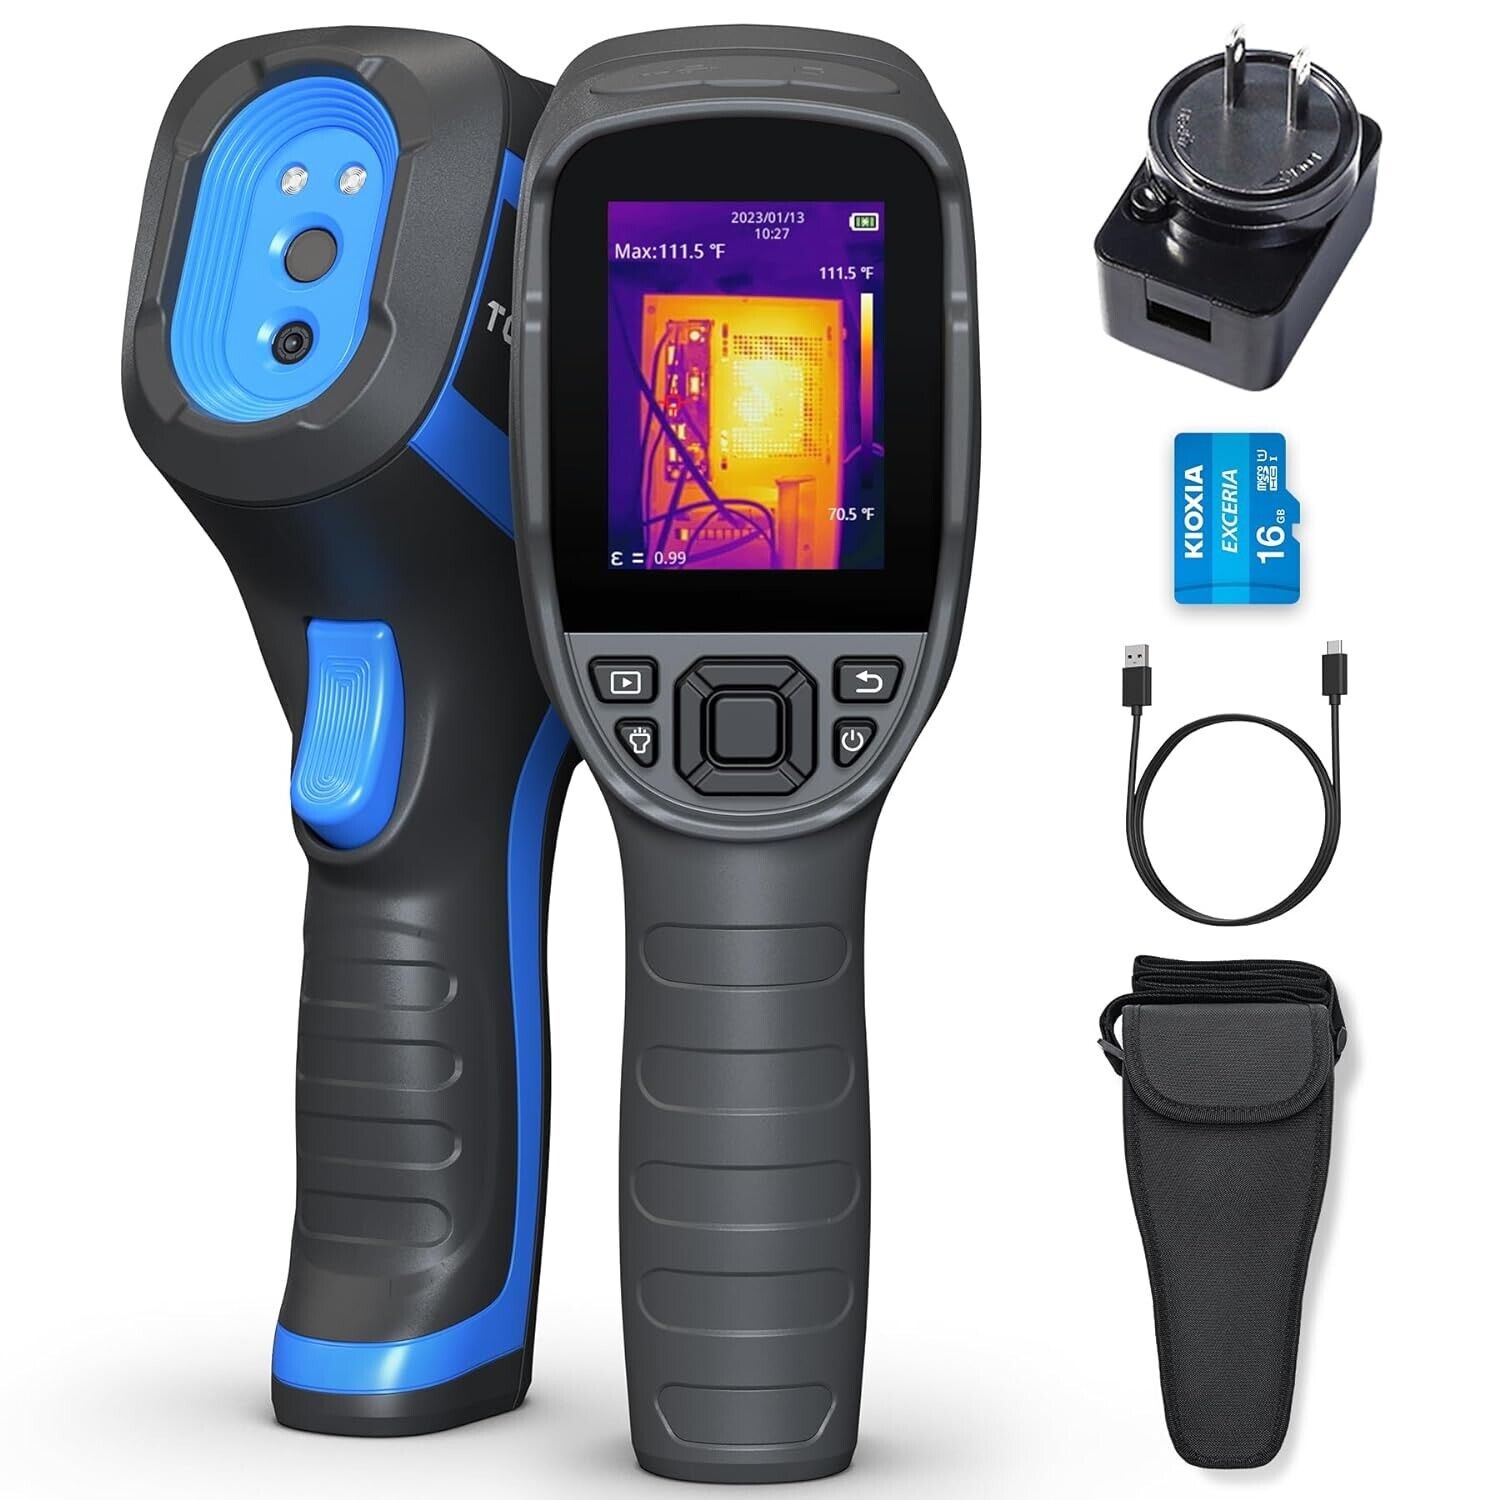 TOPDON TC005 Thermal Camera Handheld Infrared Imager for construction inspection